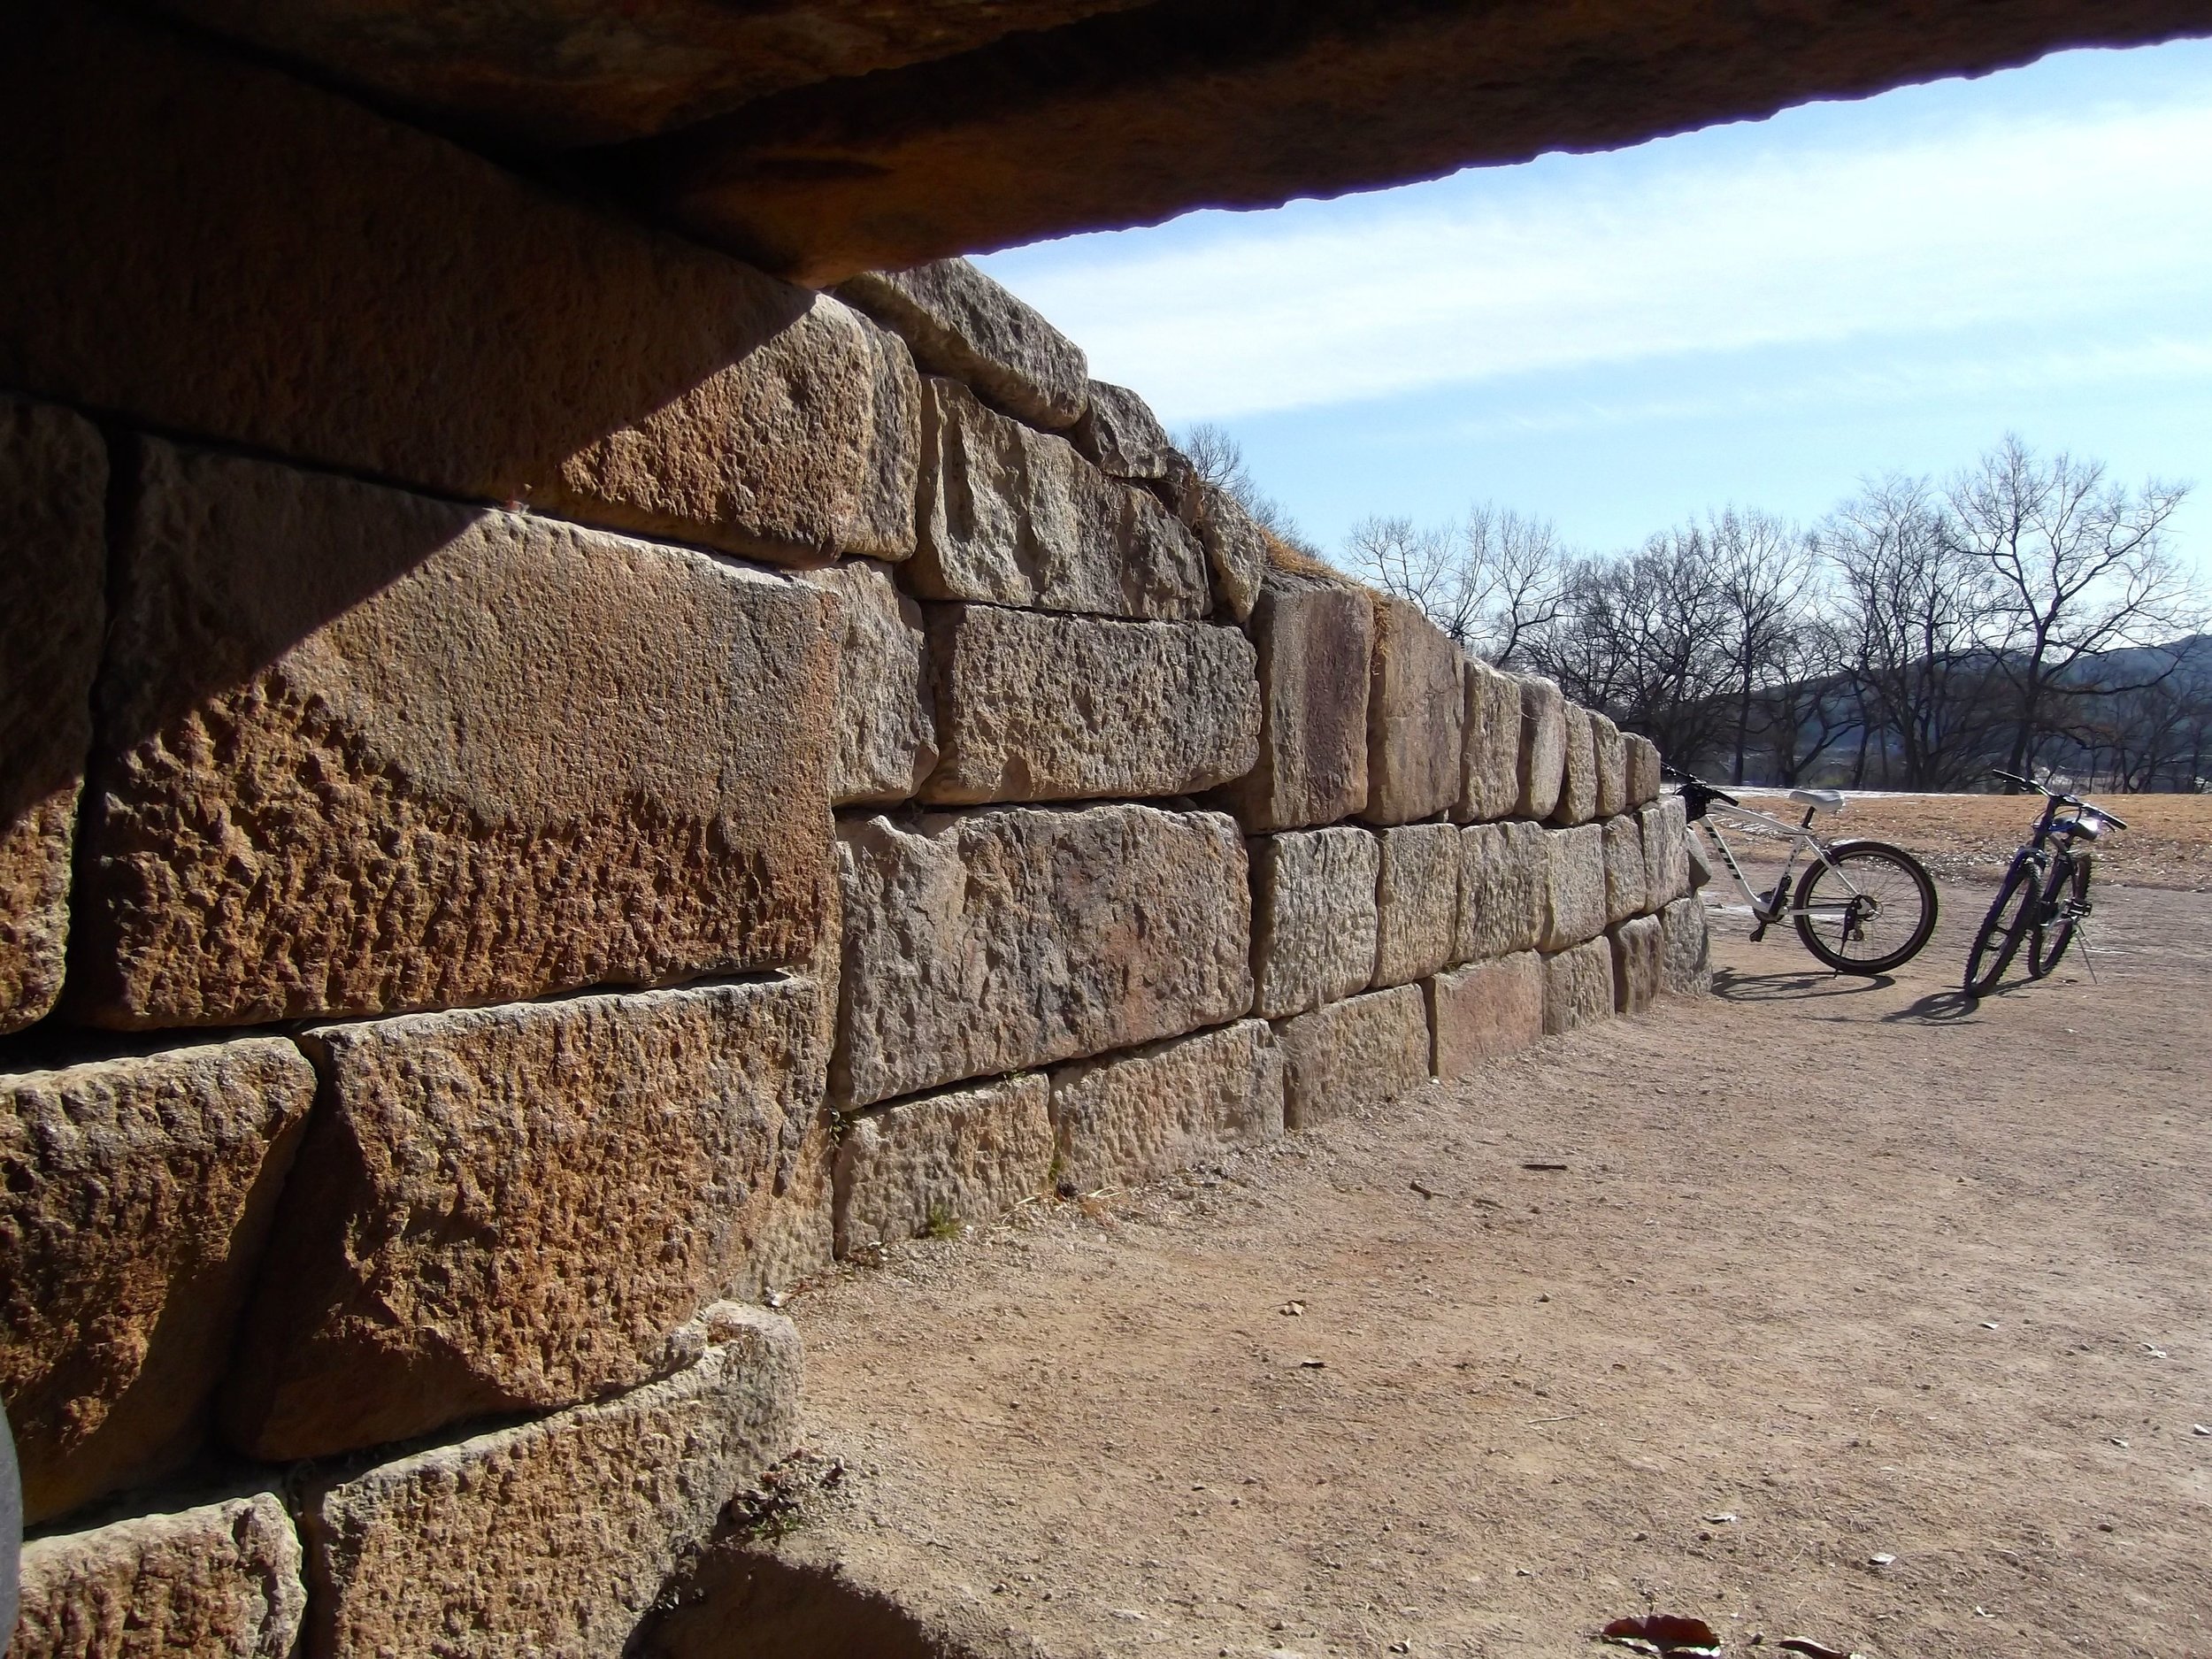 Bikes-at-the-Icehouse.jpg